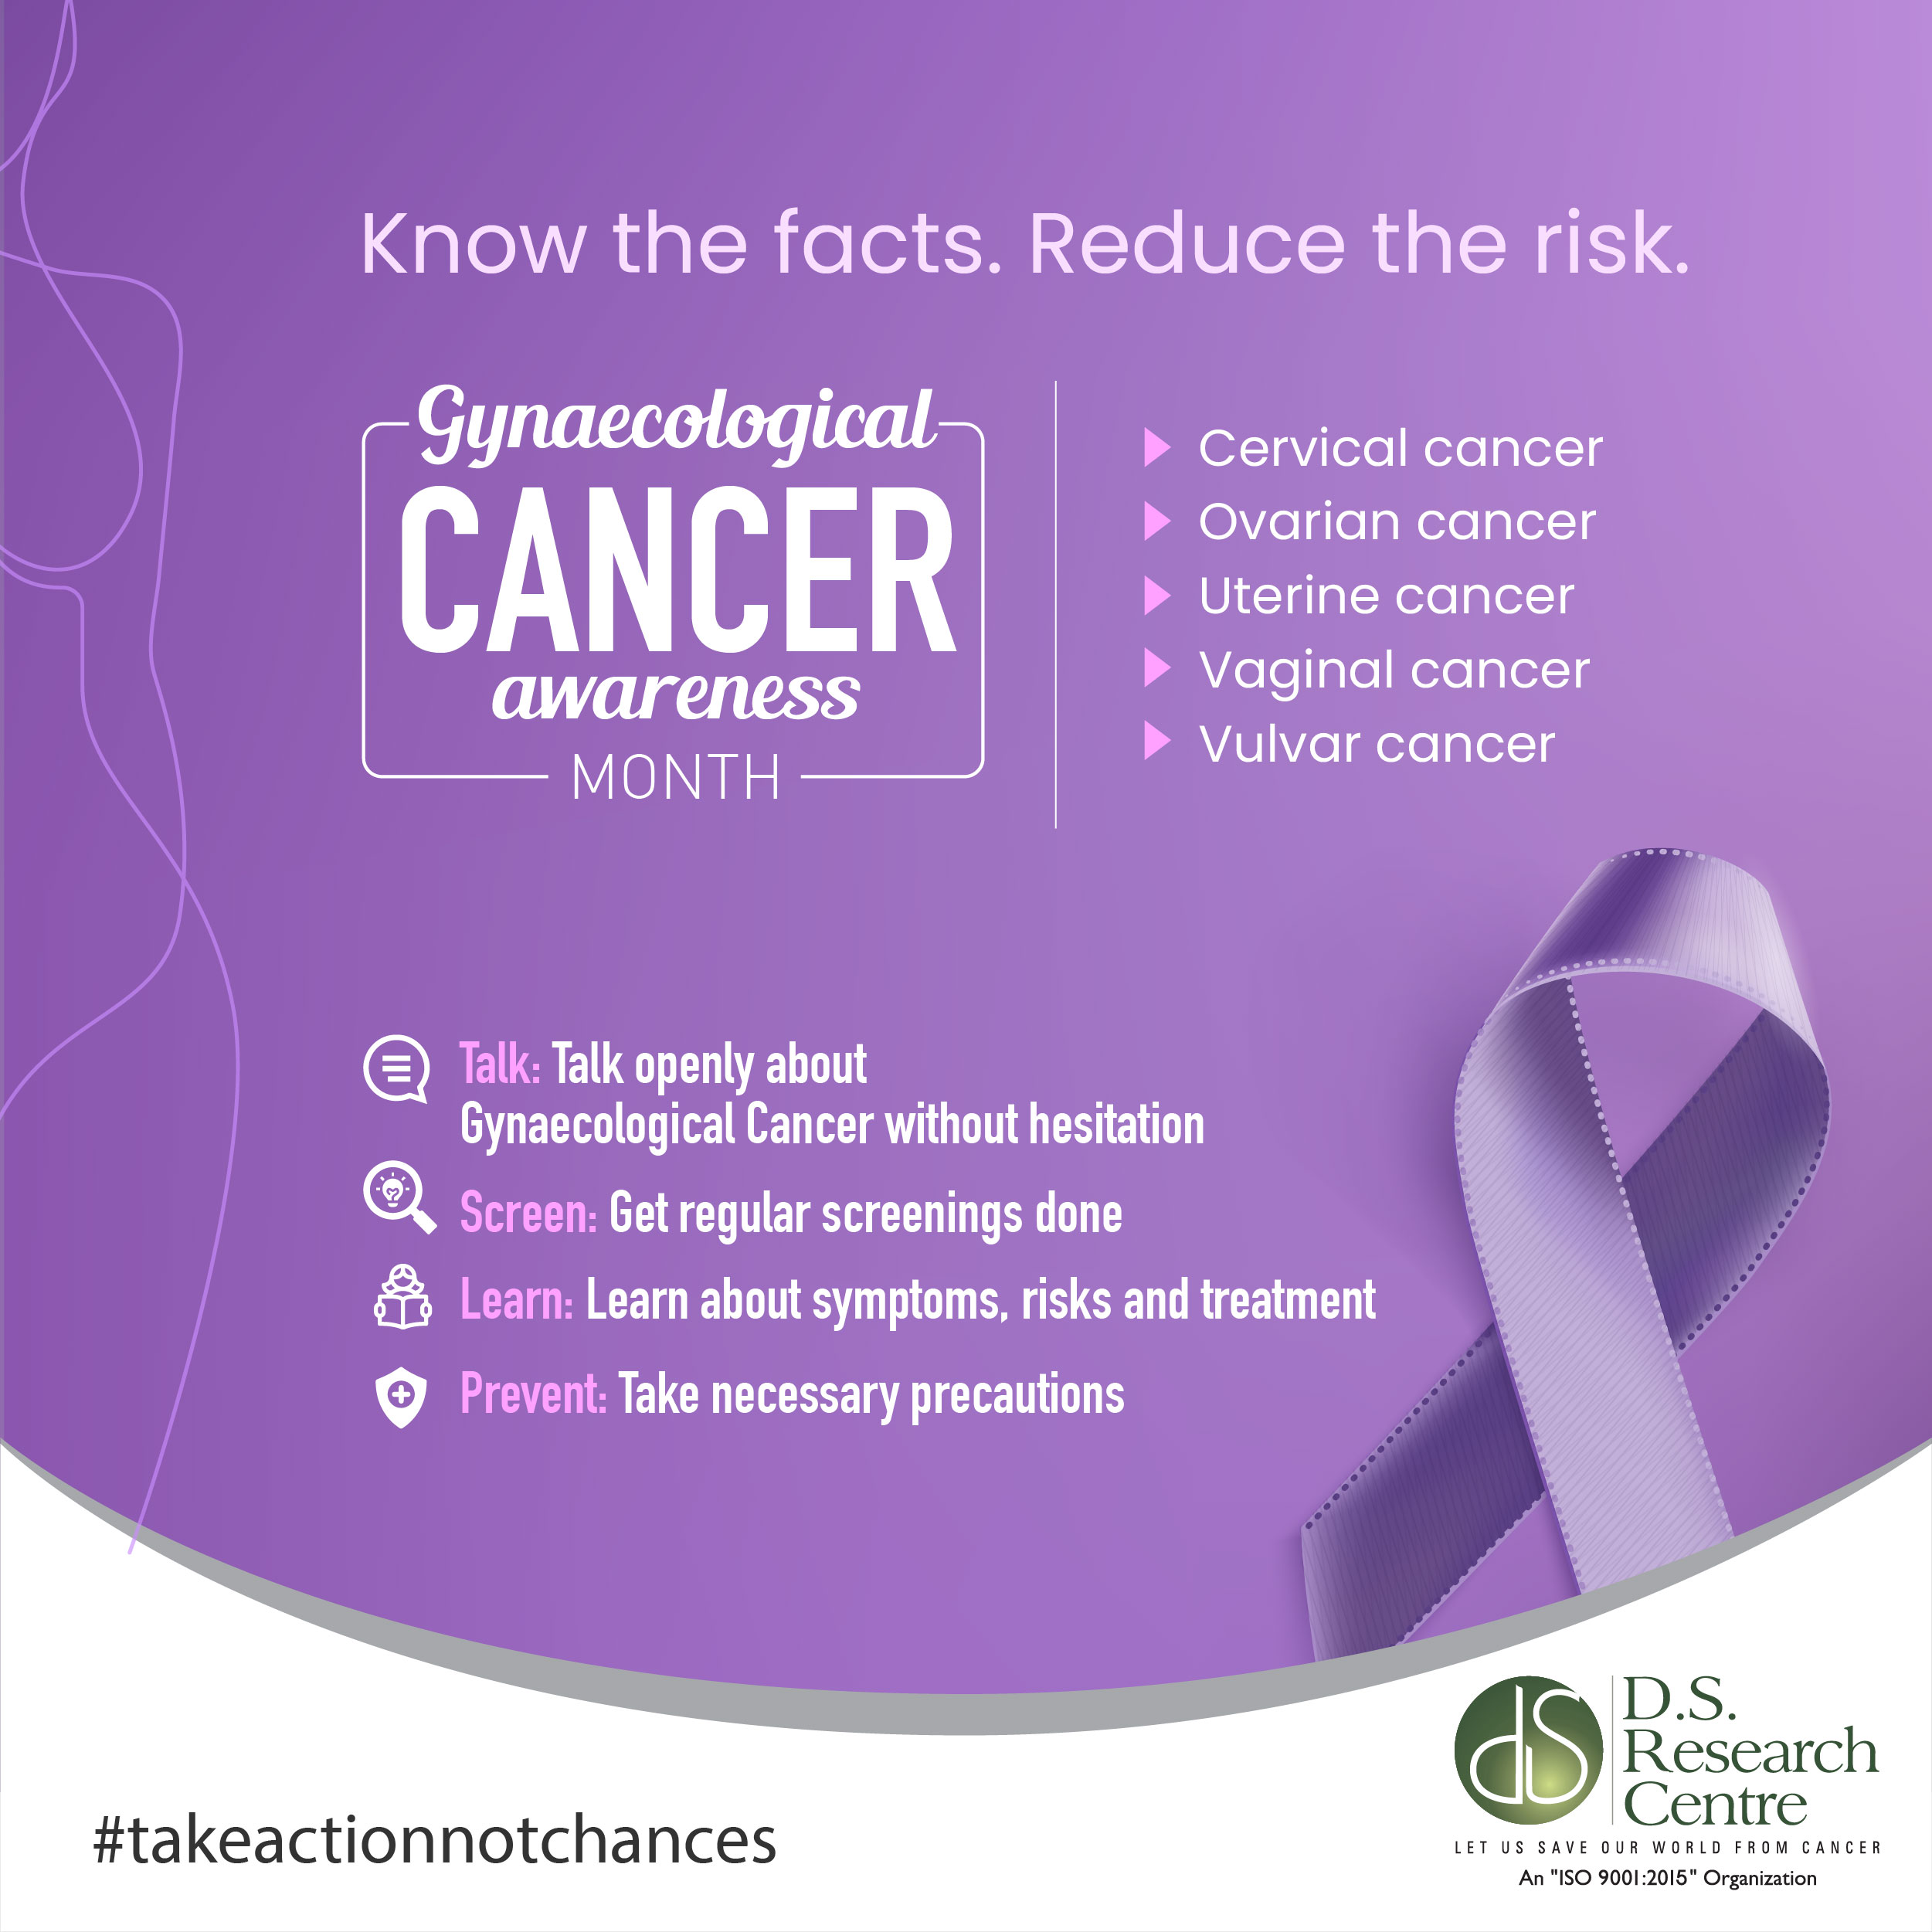 Gynecological Cancer Awareness: Know the Symptoms, Reduce the Risk.